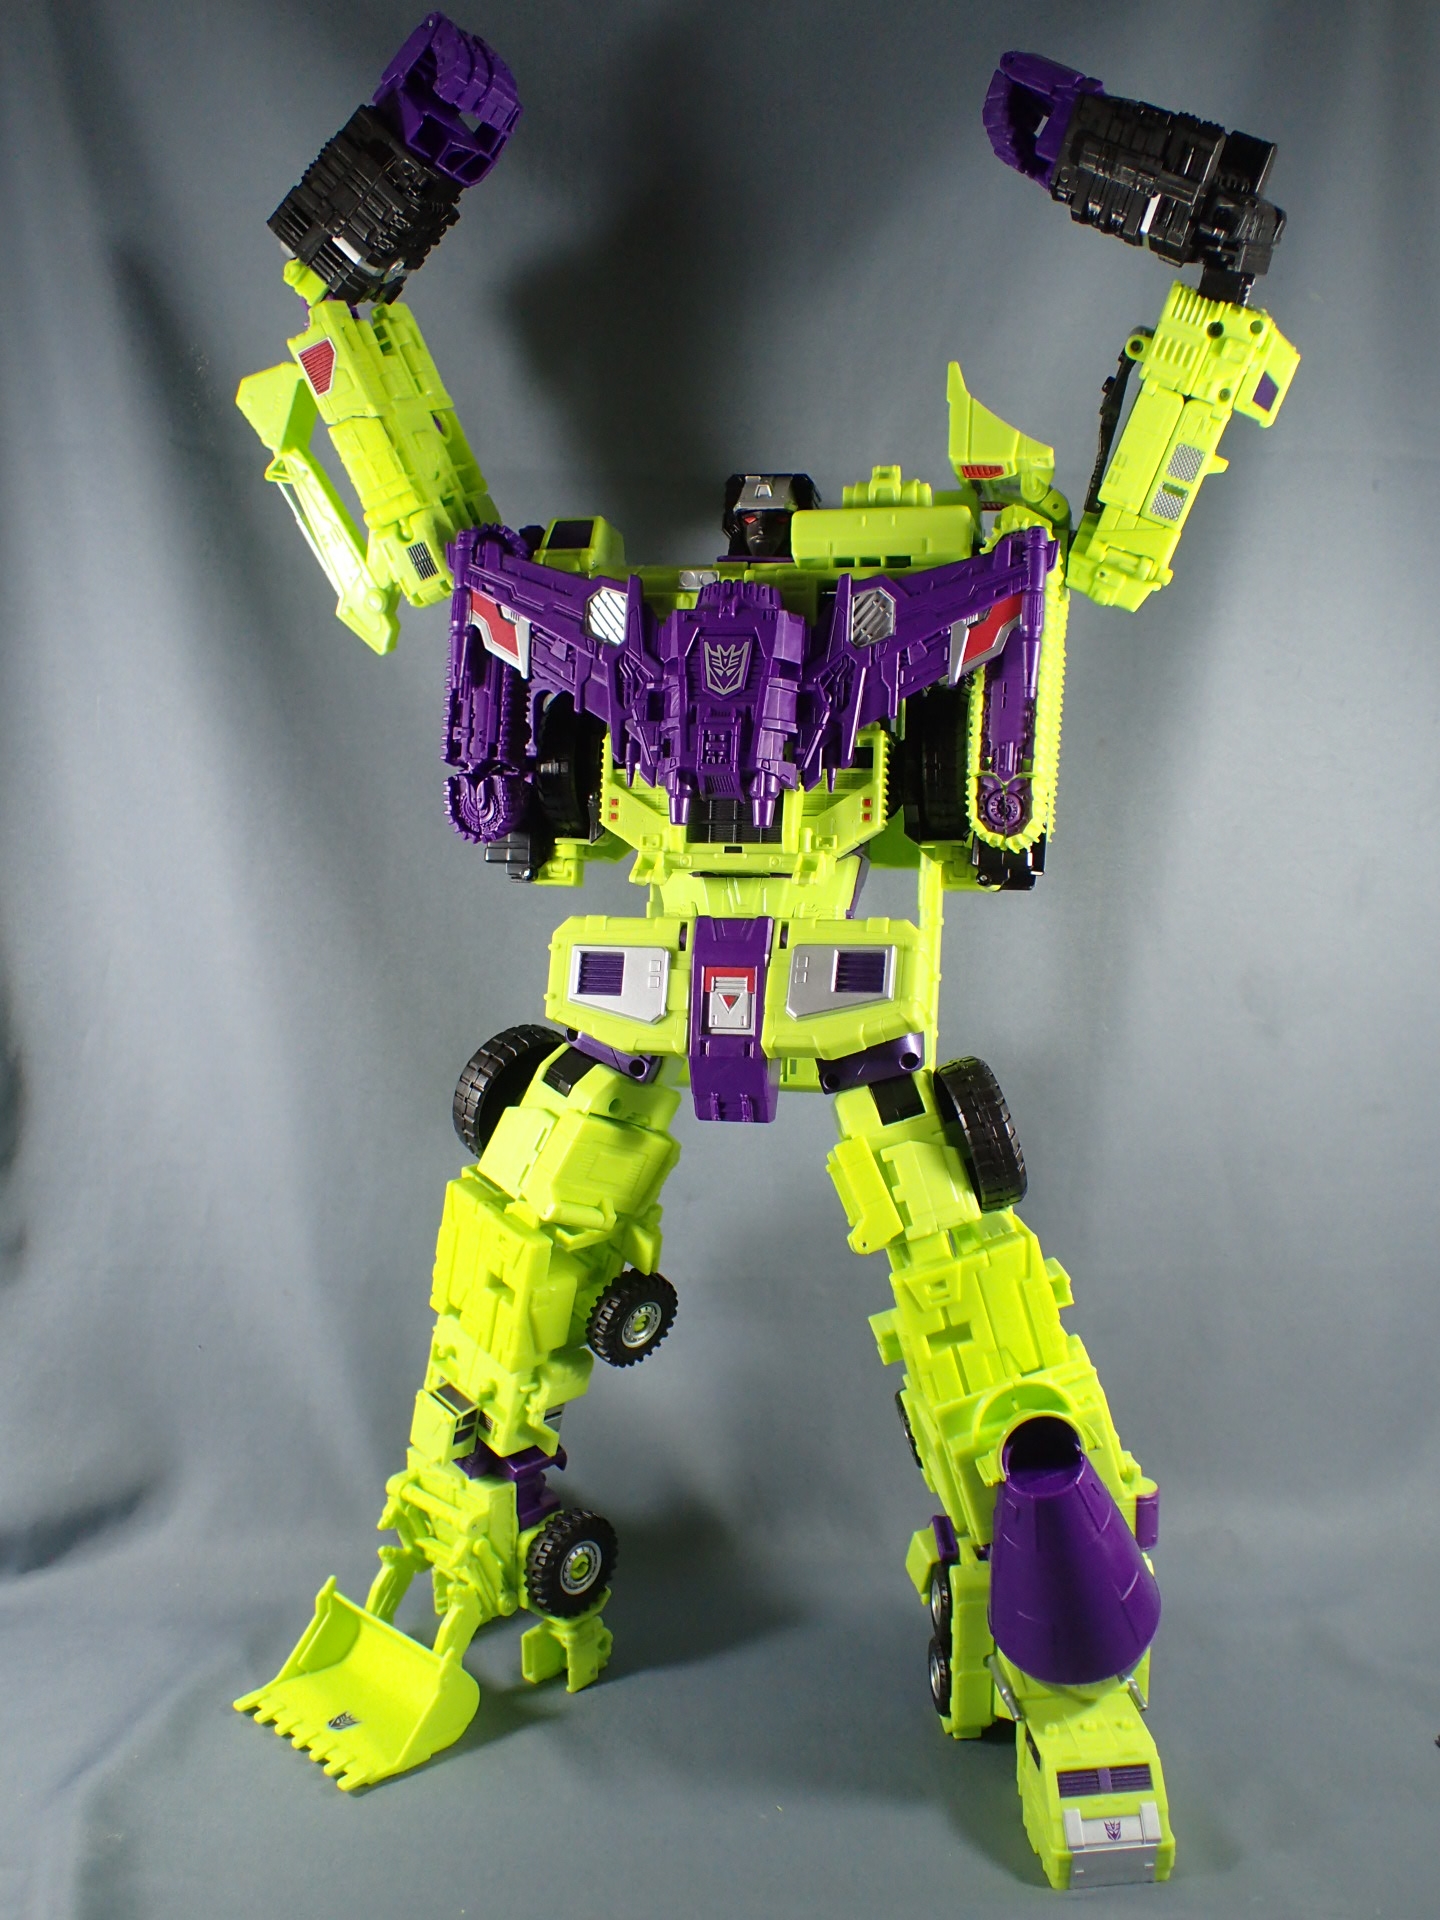 Transformers News: Review of Changes and Upgrades in Takara's Transformers Unite Warriors Devastator (UW 04)